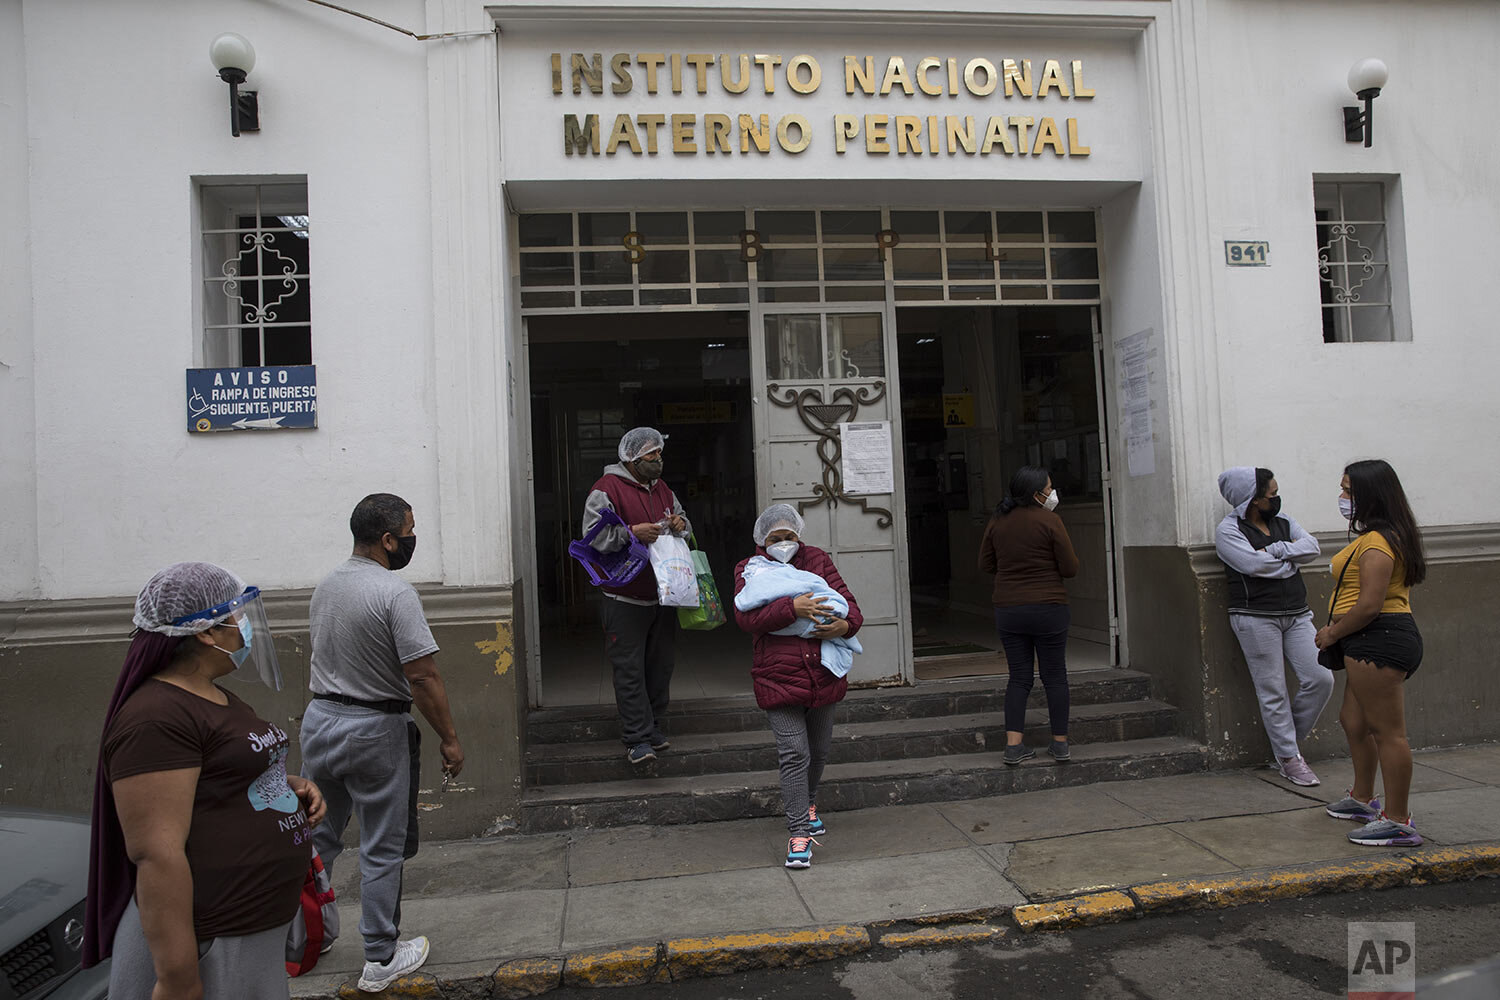  Accompanied by her husband, Carmen Garcia, 43, cradles her newborn baby delivered in a special ward for mothers with COVID-19, as they leave the National Maternal Perinatal Institute, in Lima, Peru, Thursday, July 9, 2020. (AP Photo/Rodrigo Abd) 